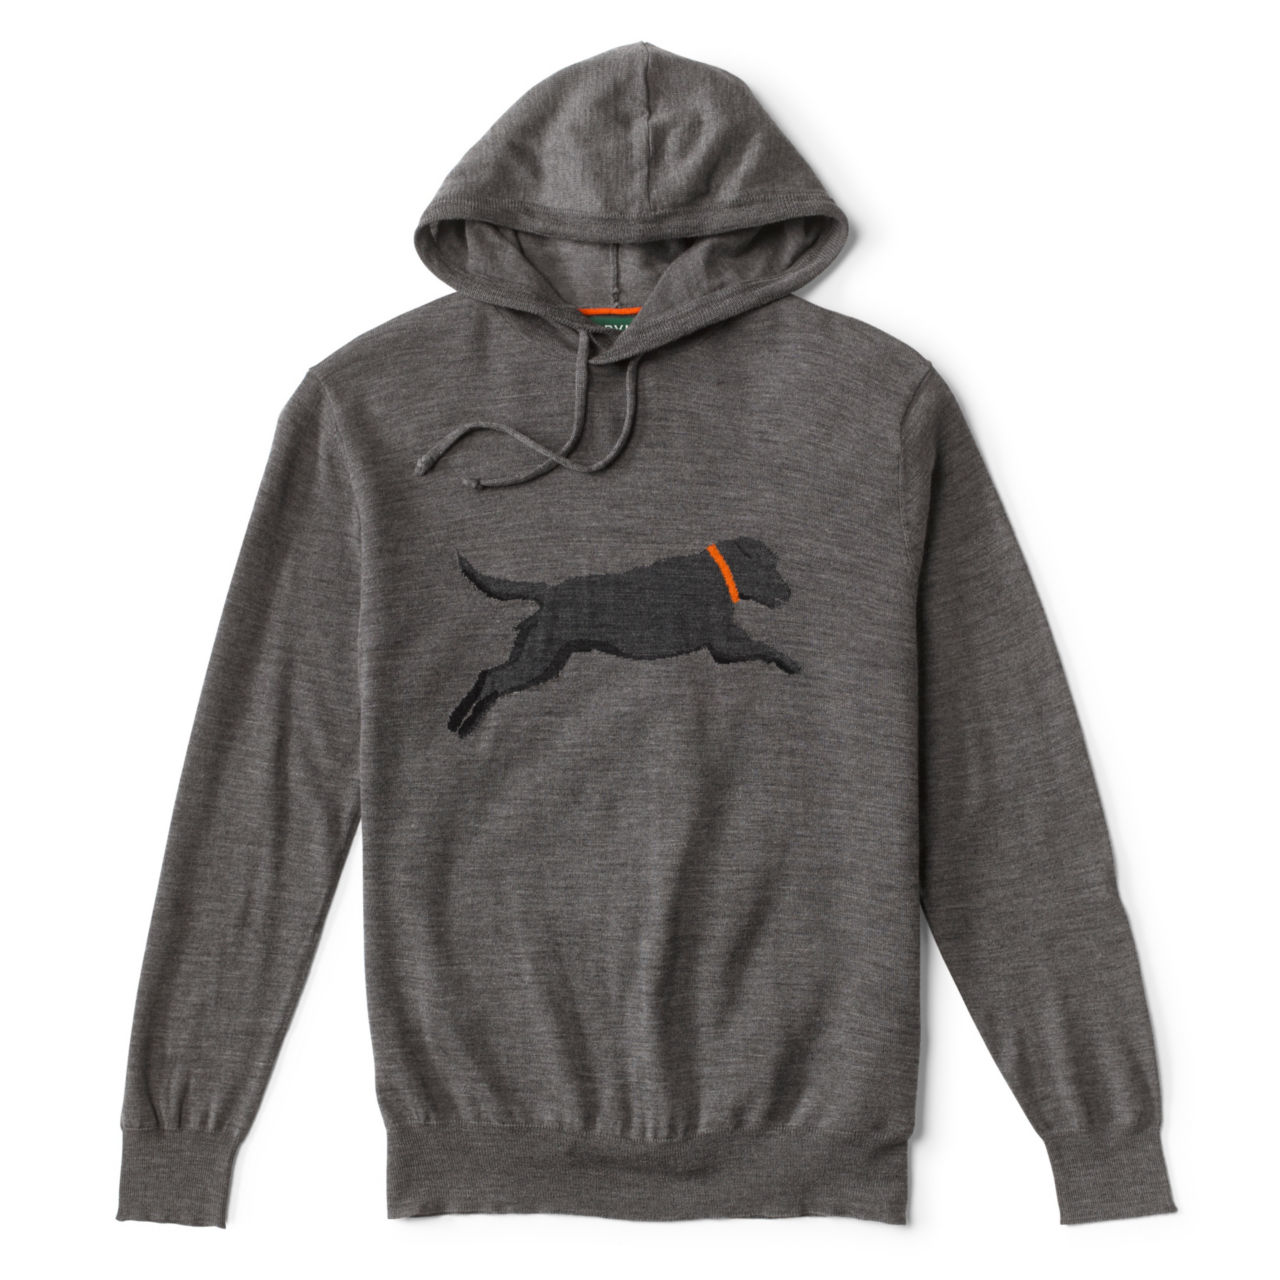 Sporting Icons Hoodie Sweater - CHARCOAL WITH DOG image number 0